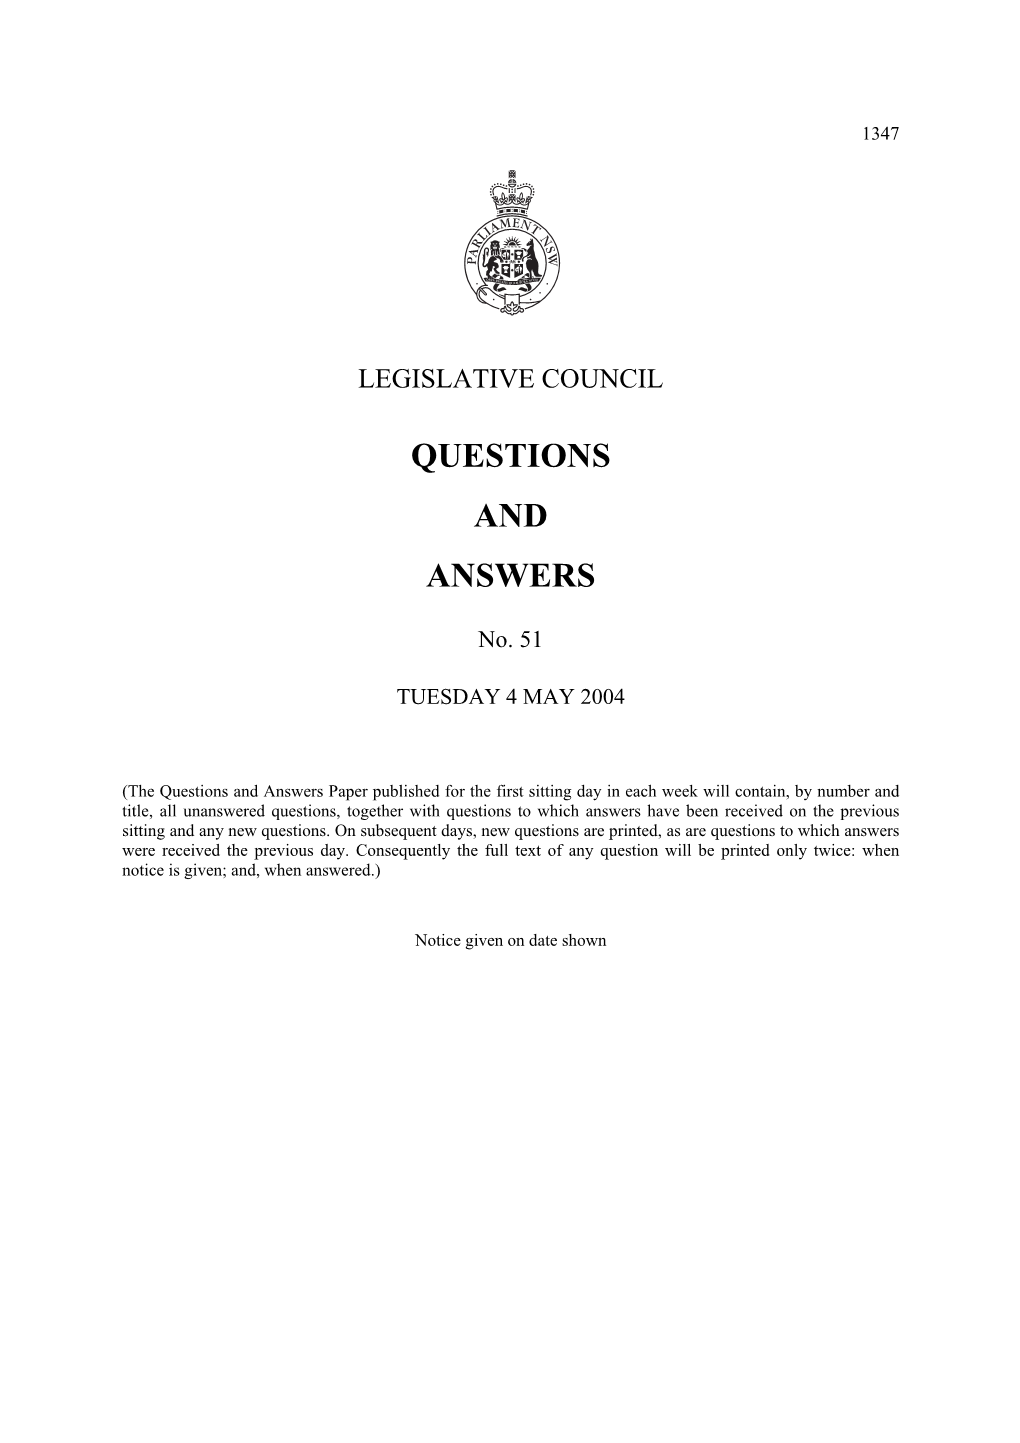 Questions & Answers Paper No. 51